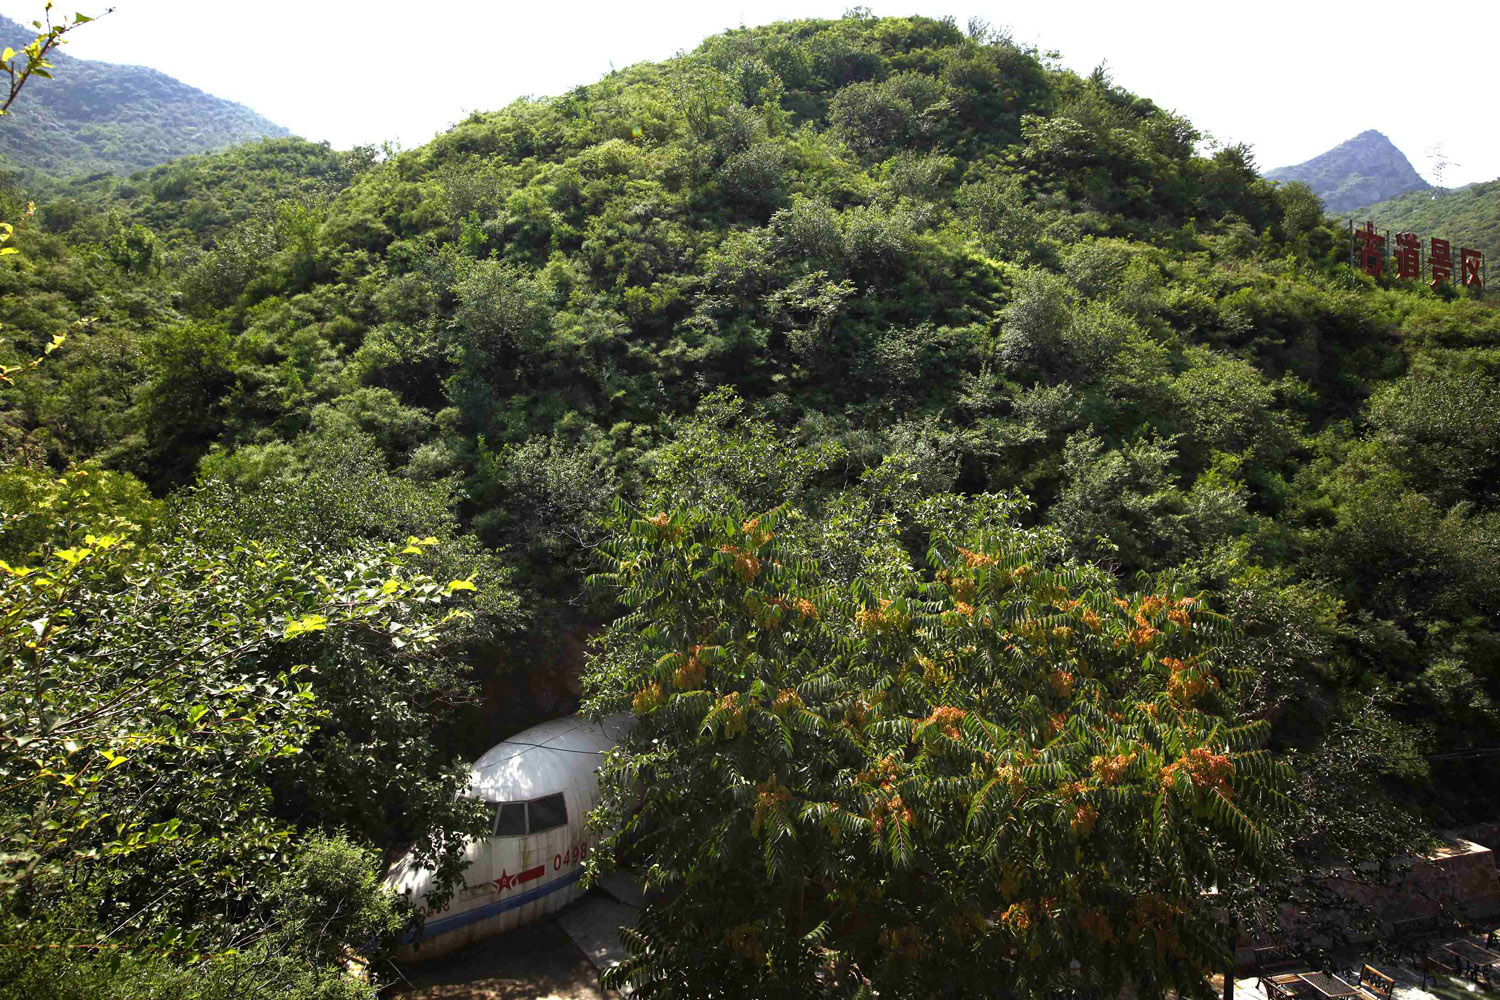 July 16, 2012. The entrance to a cave, shaped in the form of an aeroplane, can be seen under a mountain that was once the headquarters of former Chinese Communist military leader Lin Biao located on the outskirts of Beijing.